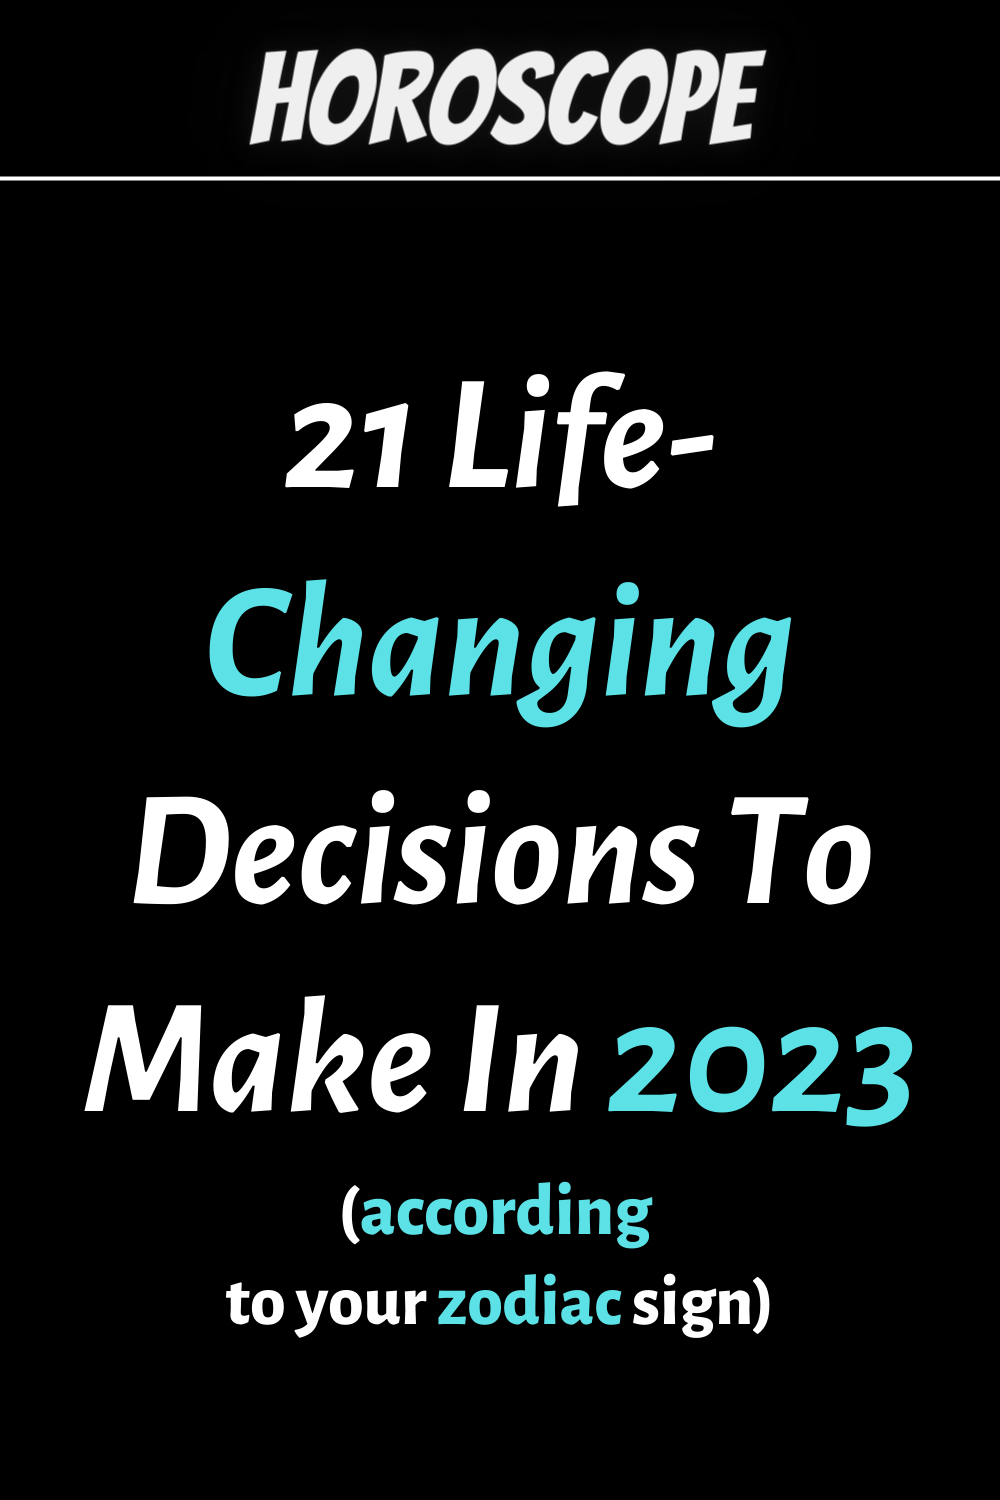 21 Life-Changing Decisions To Make In 2023